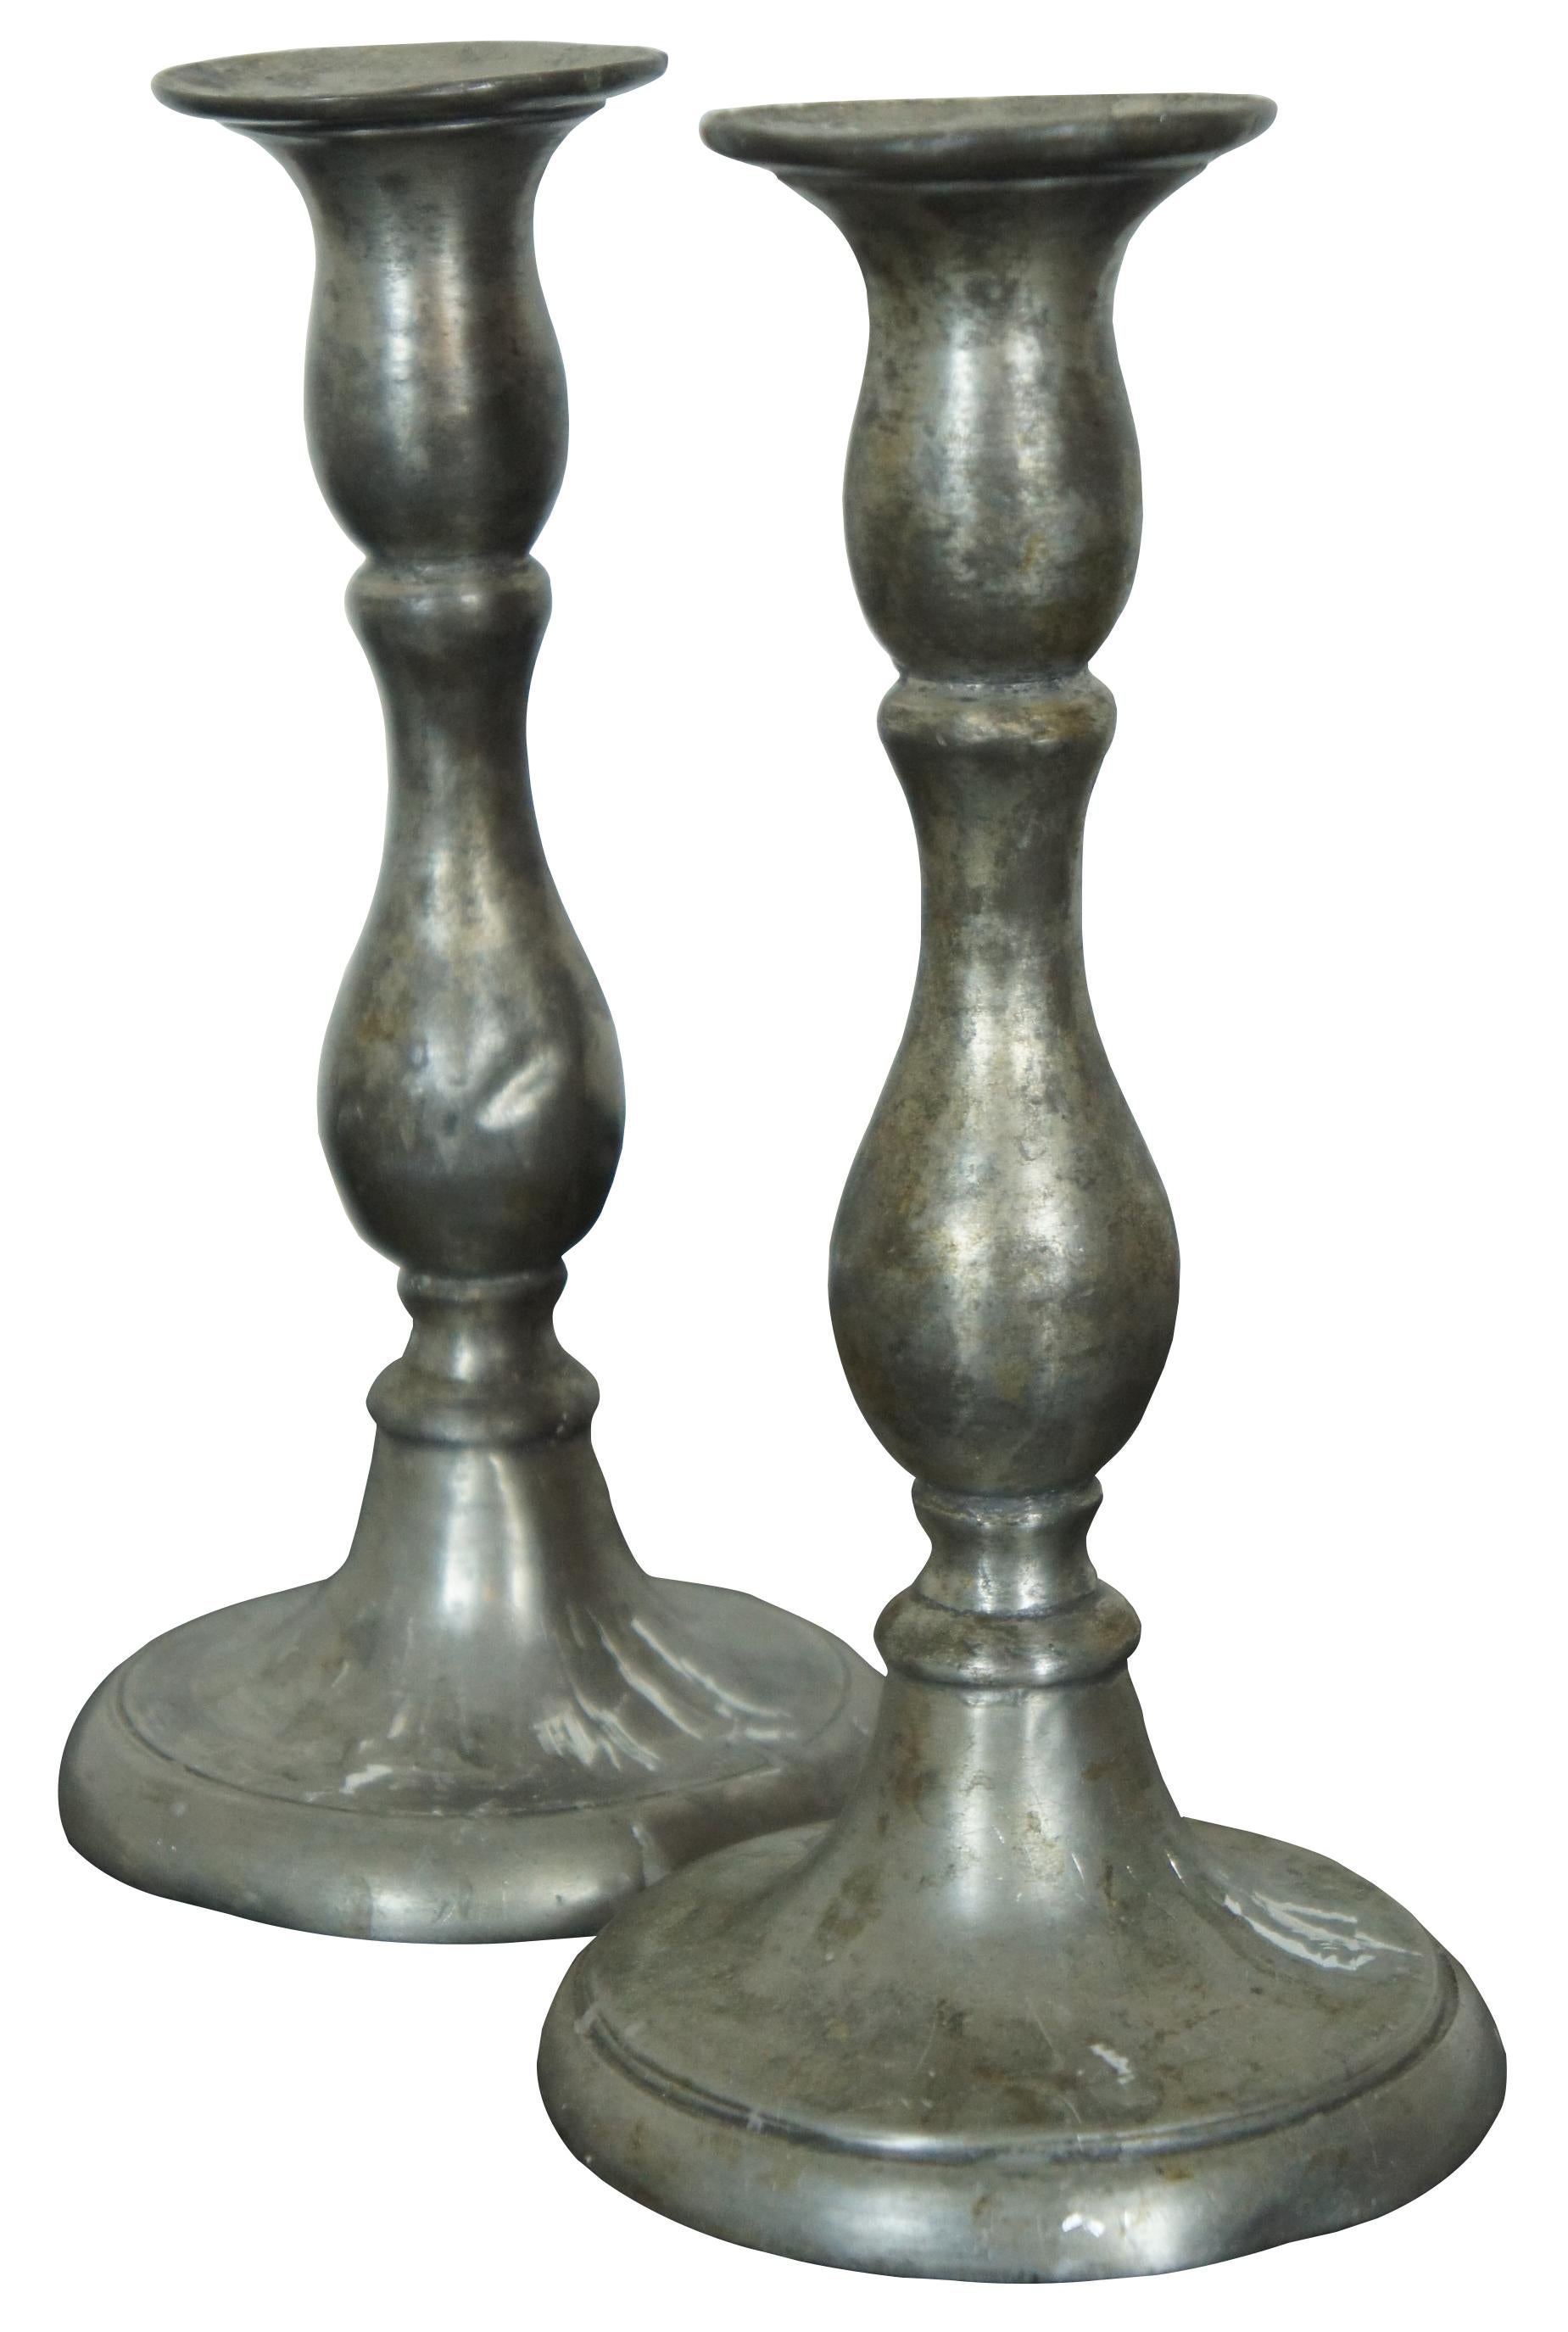 Pair of antique early American baluster style pewter candlesticks.
